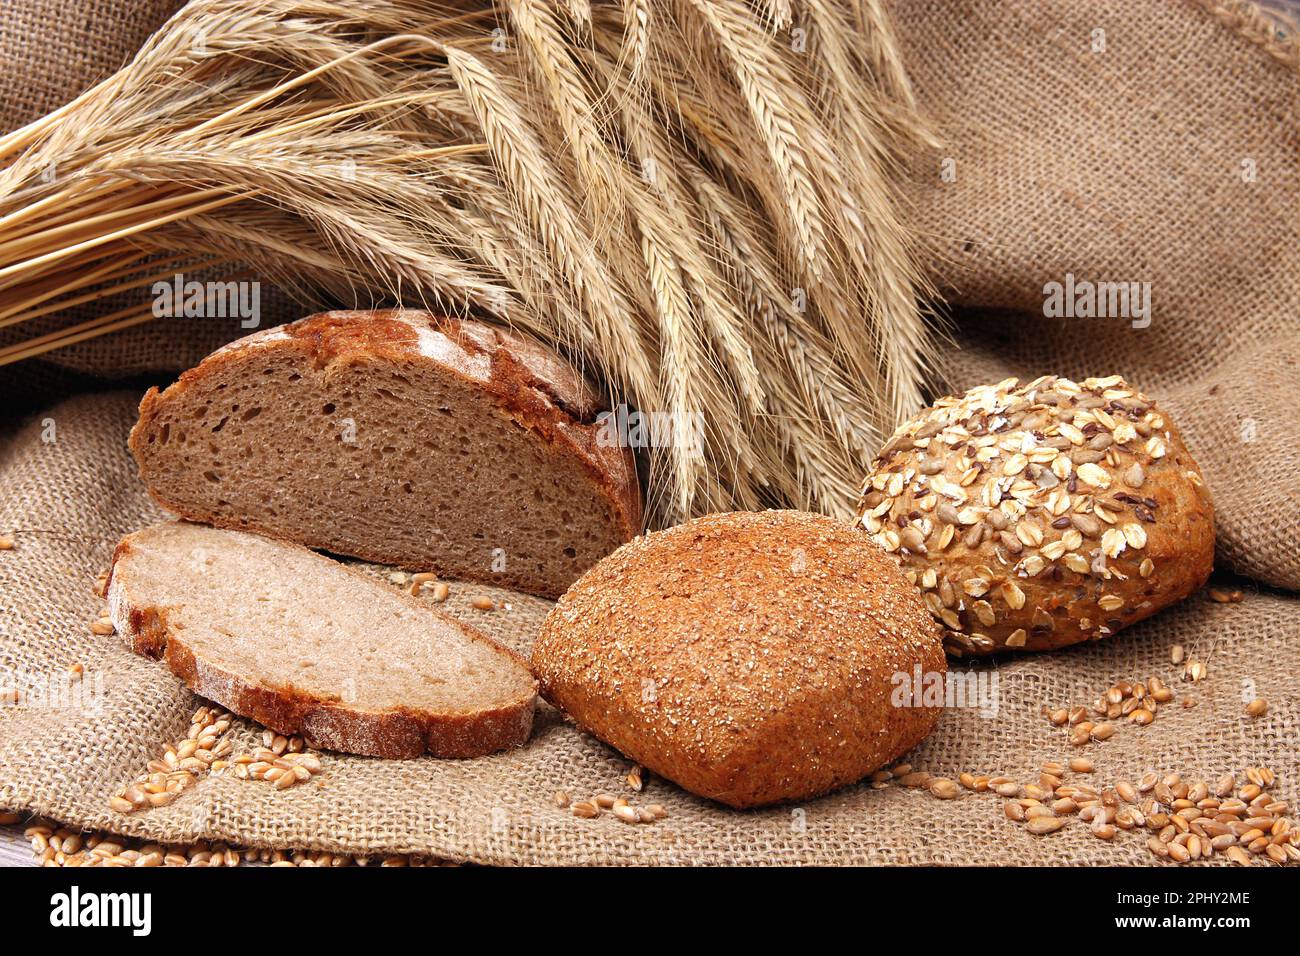 bread and rolls with wheat ears Stock Photo